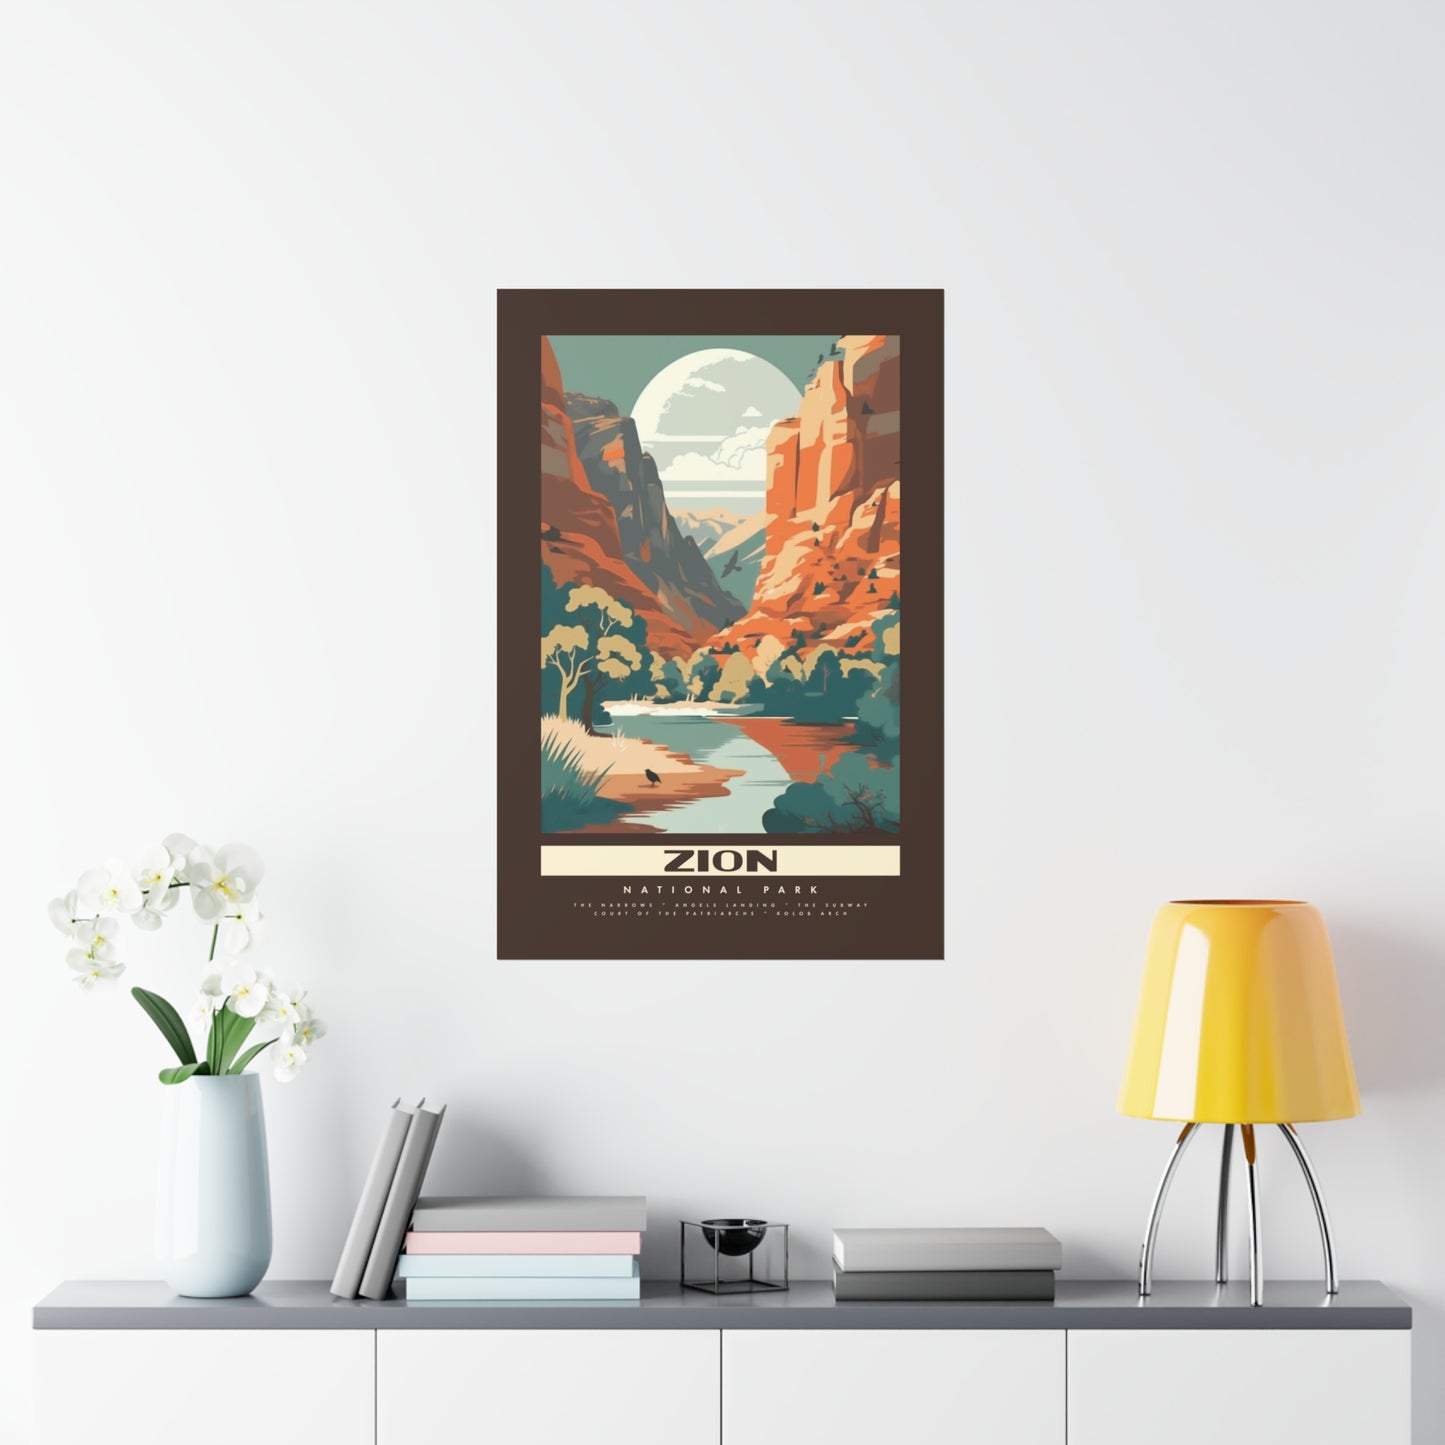 Zion National Park Travel Poster 24 in. x 36 in.